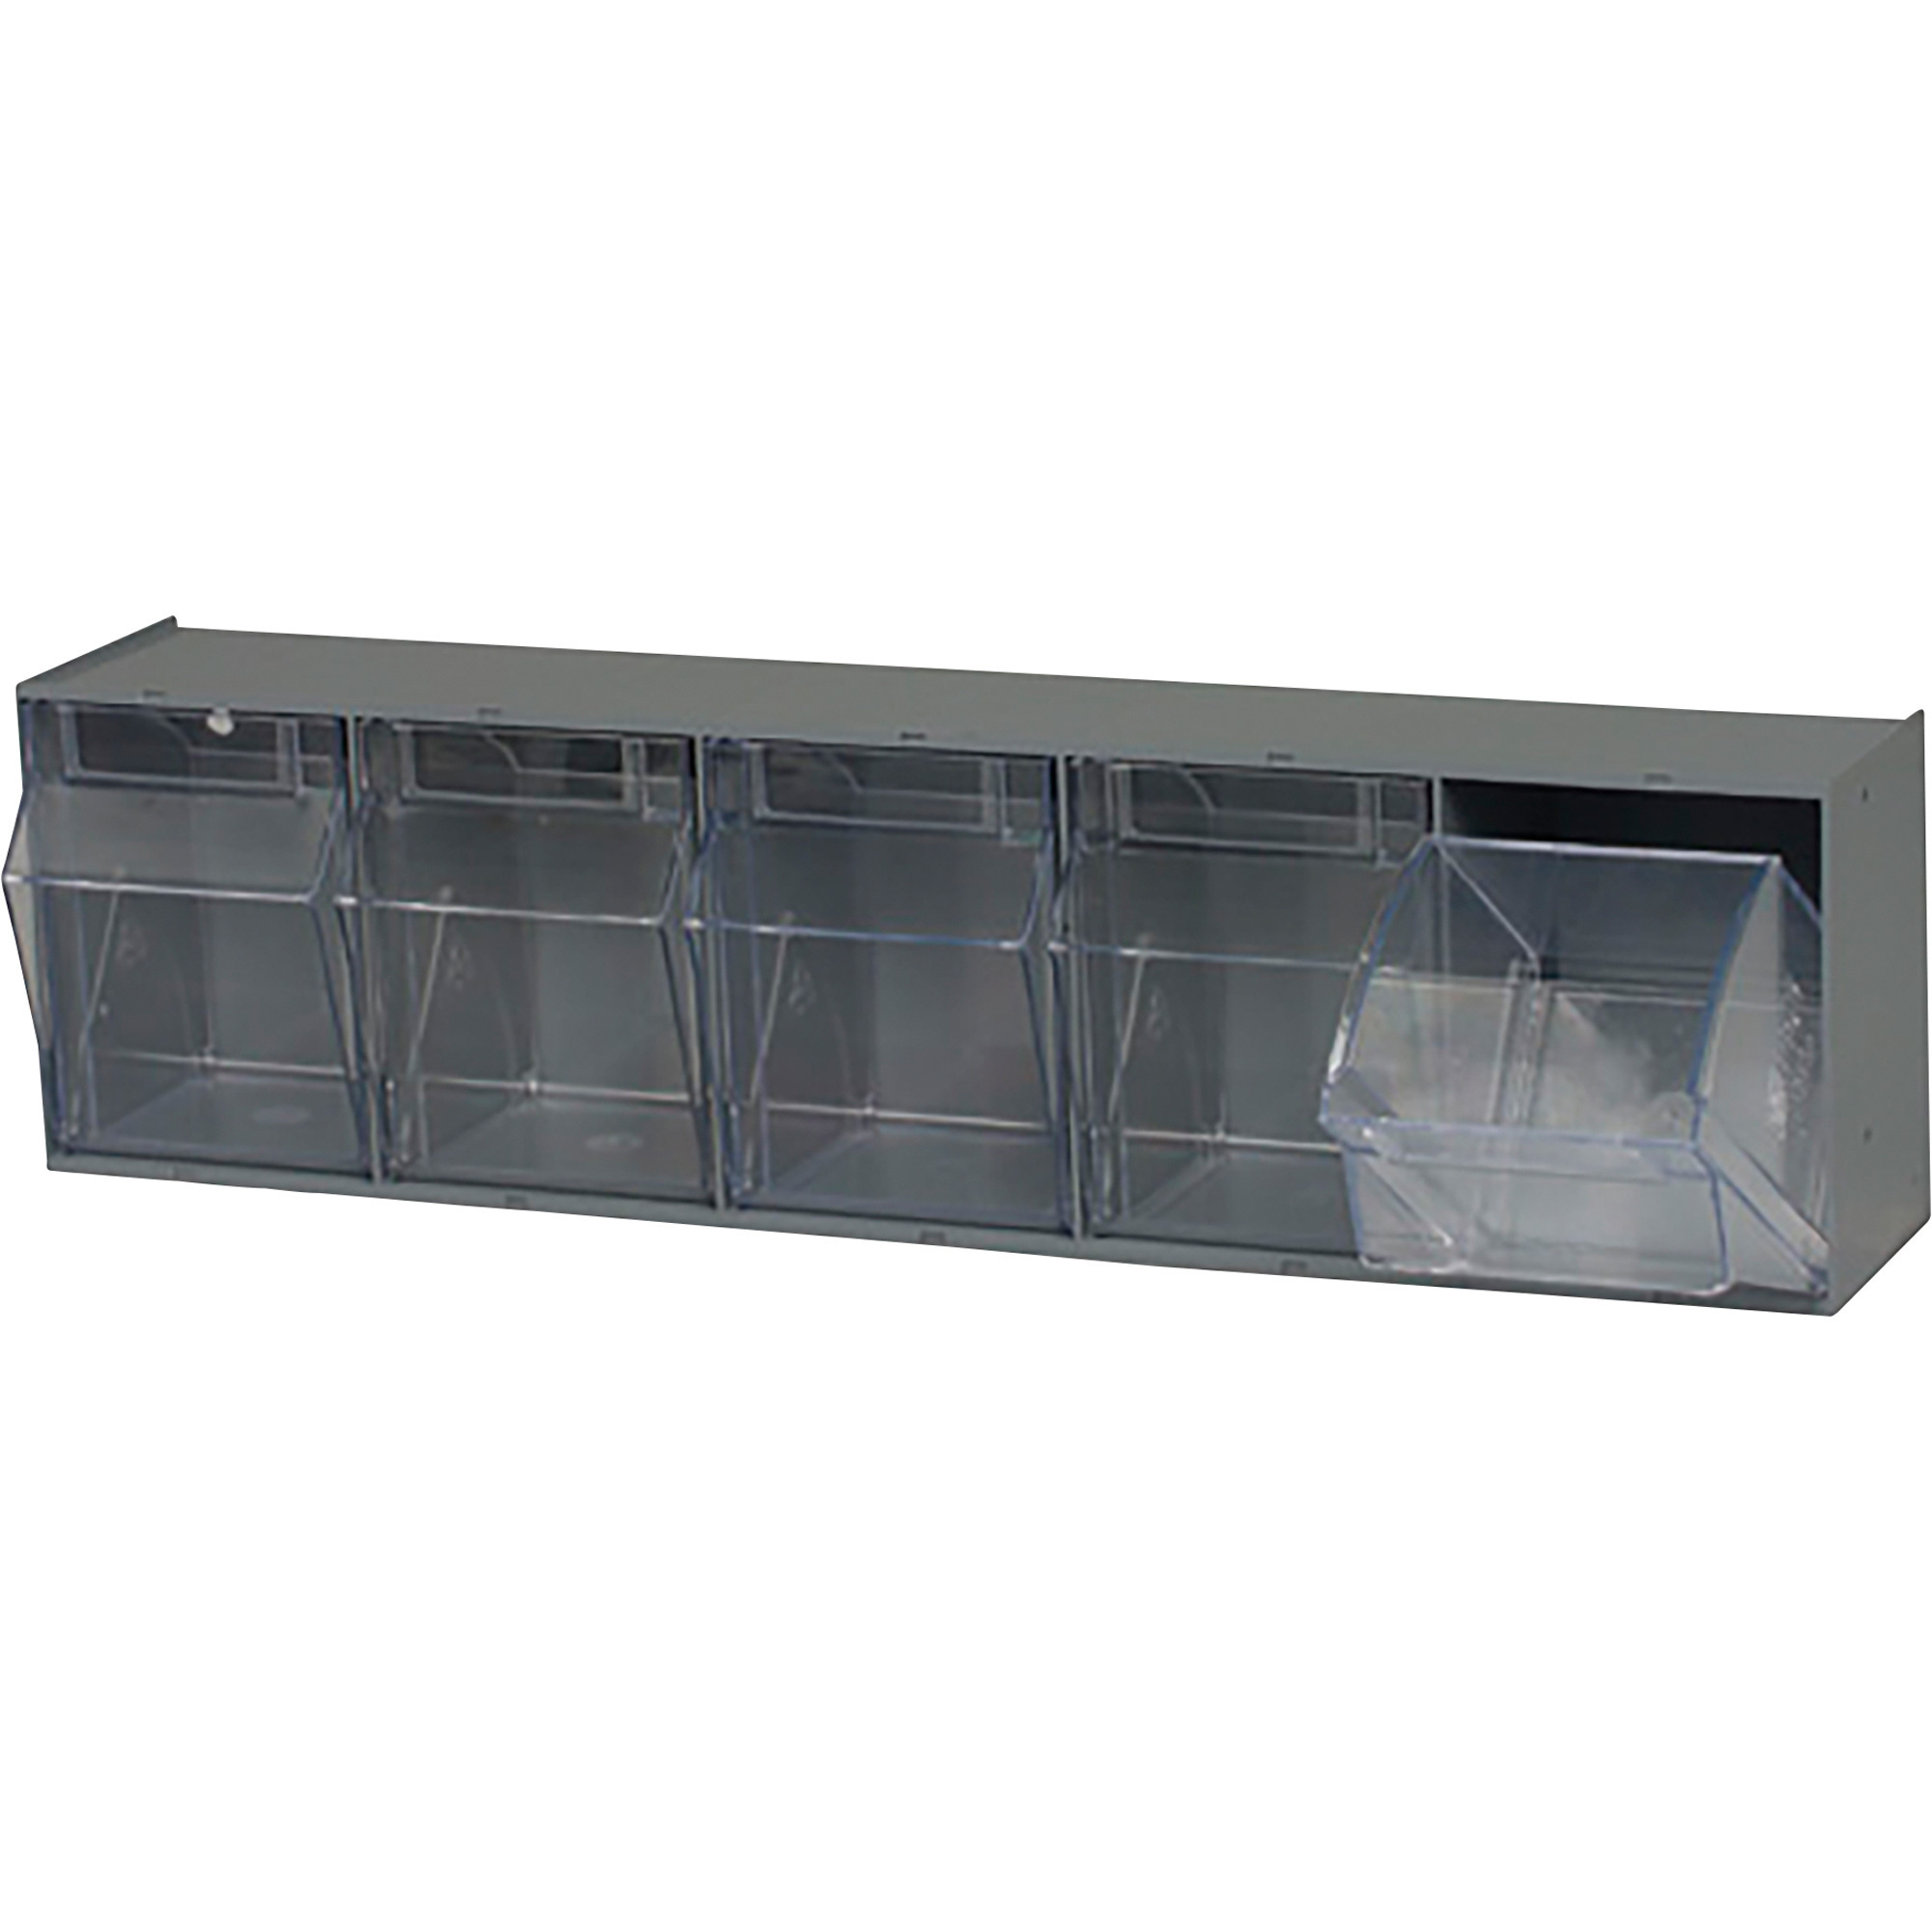 Quantum Storage Bin with Tip-Outs, Gray with 5 Clear Tip-Out Bins, 5  1/4in.L x 23 5/8in.W x 6in.D, Model# RQTB305GY